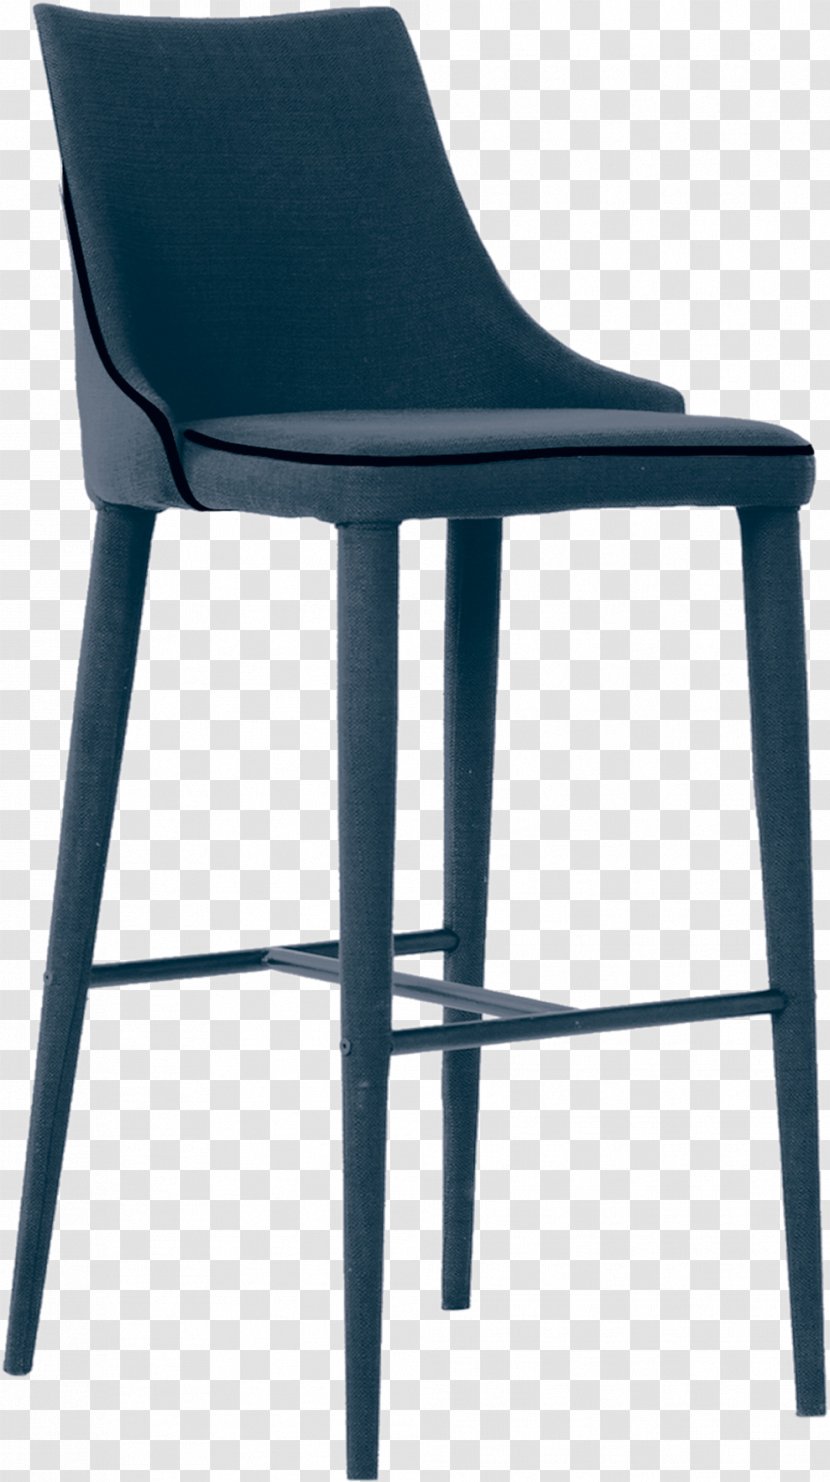 Bar Stool Chair Plastic - Side View Transparent PNG